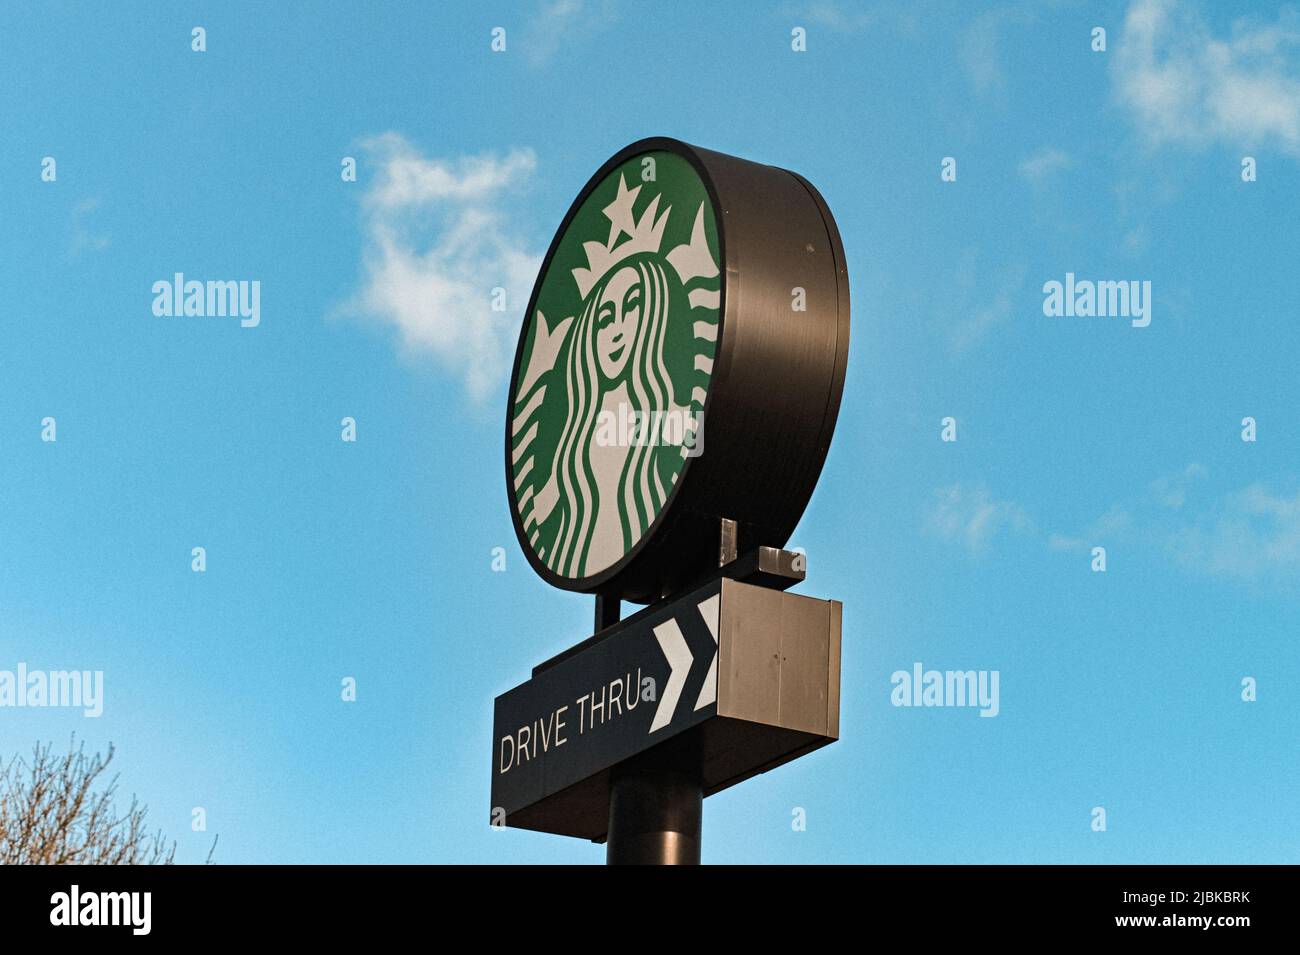 A drive thru Startbucks sign , standing tall with the backdrop of a blue sky with wispy clouds, one person, one cup and one neighborhood at a time Stock Photo